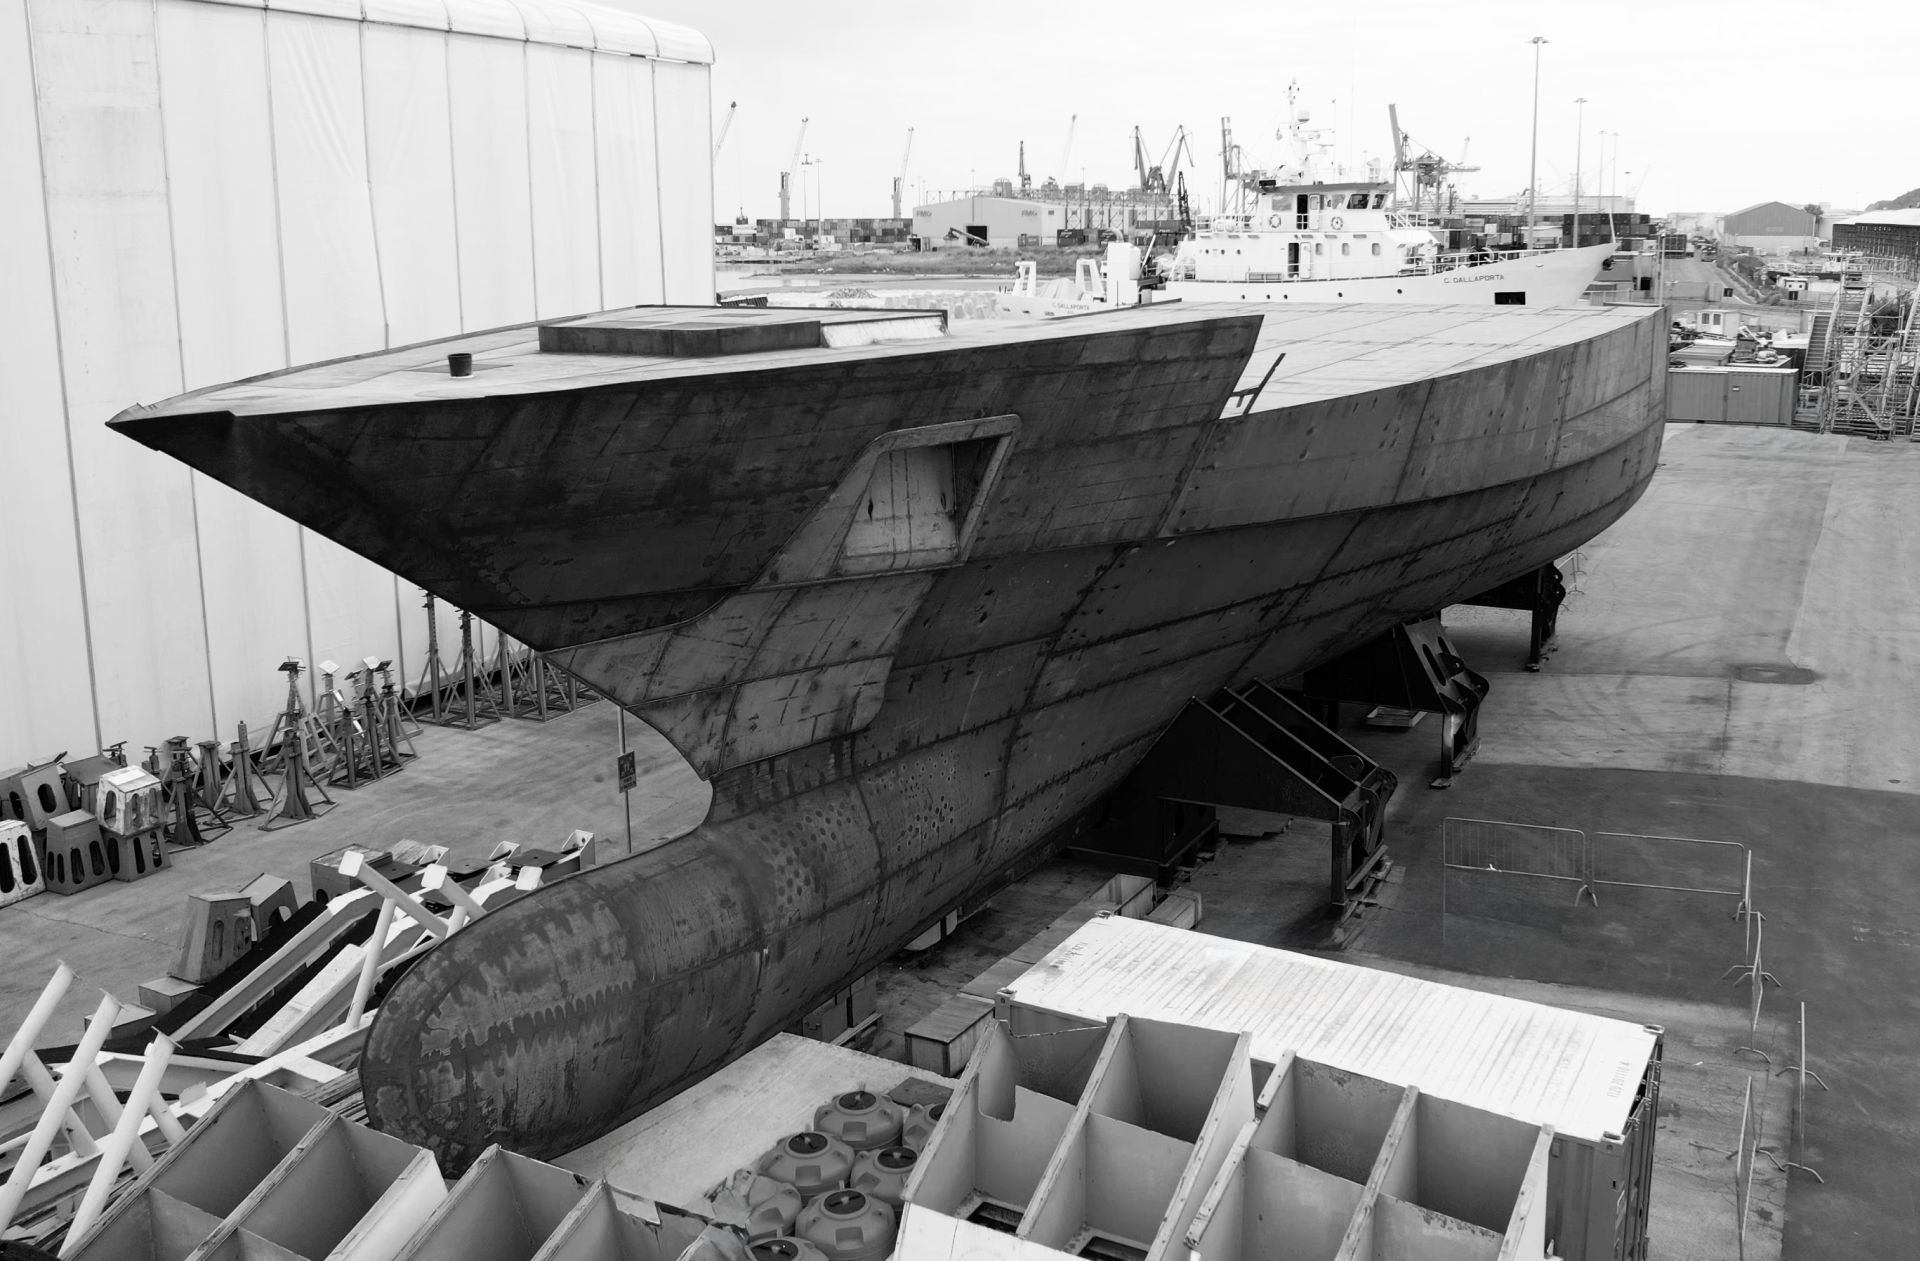 New ISA CONTINENTAL 80m:  Construction Of The Hull Has Begun On Speculation